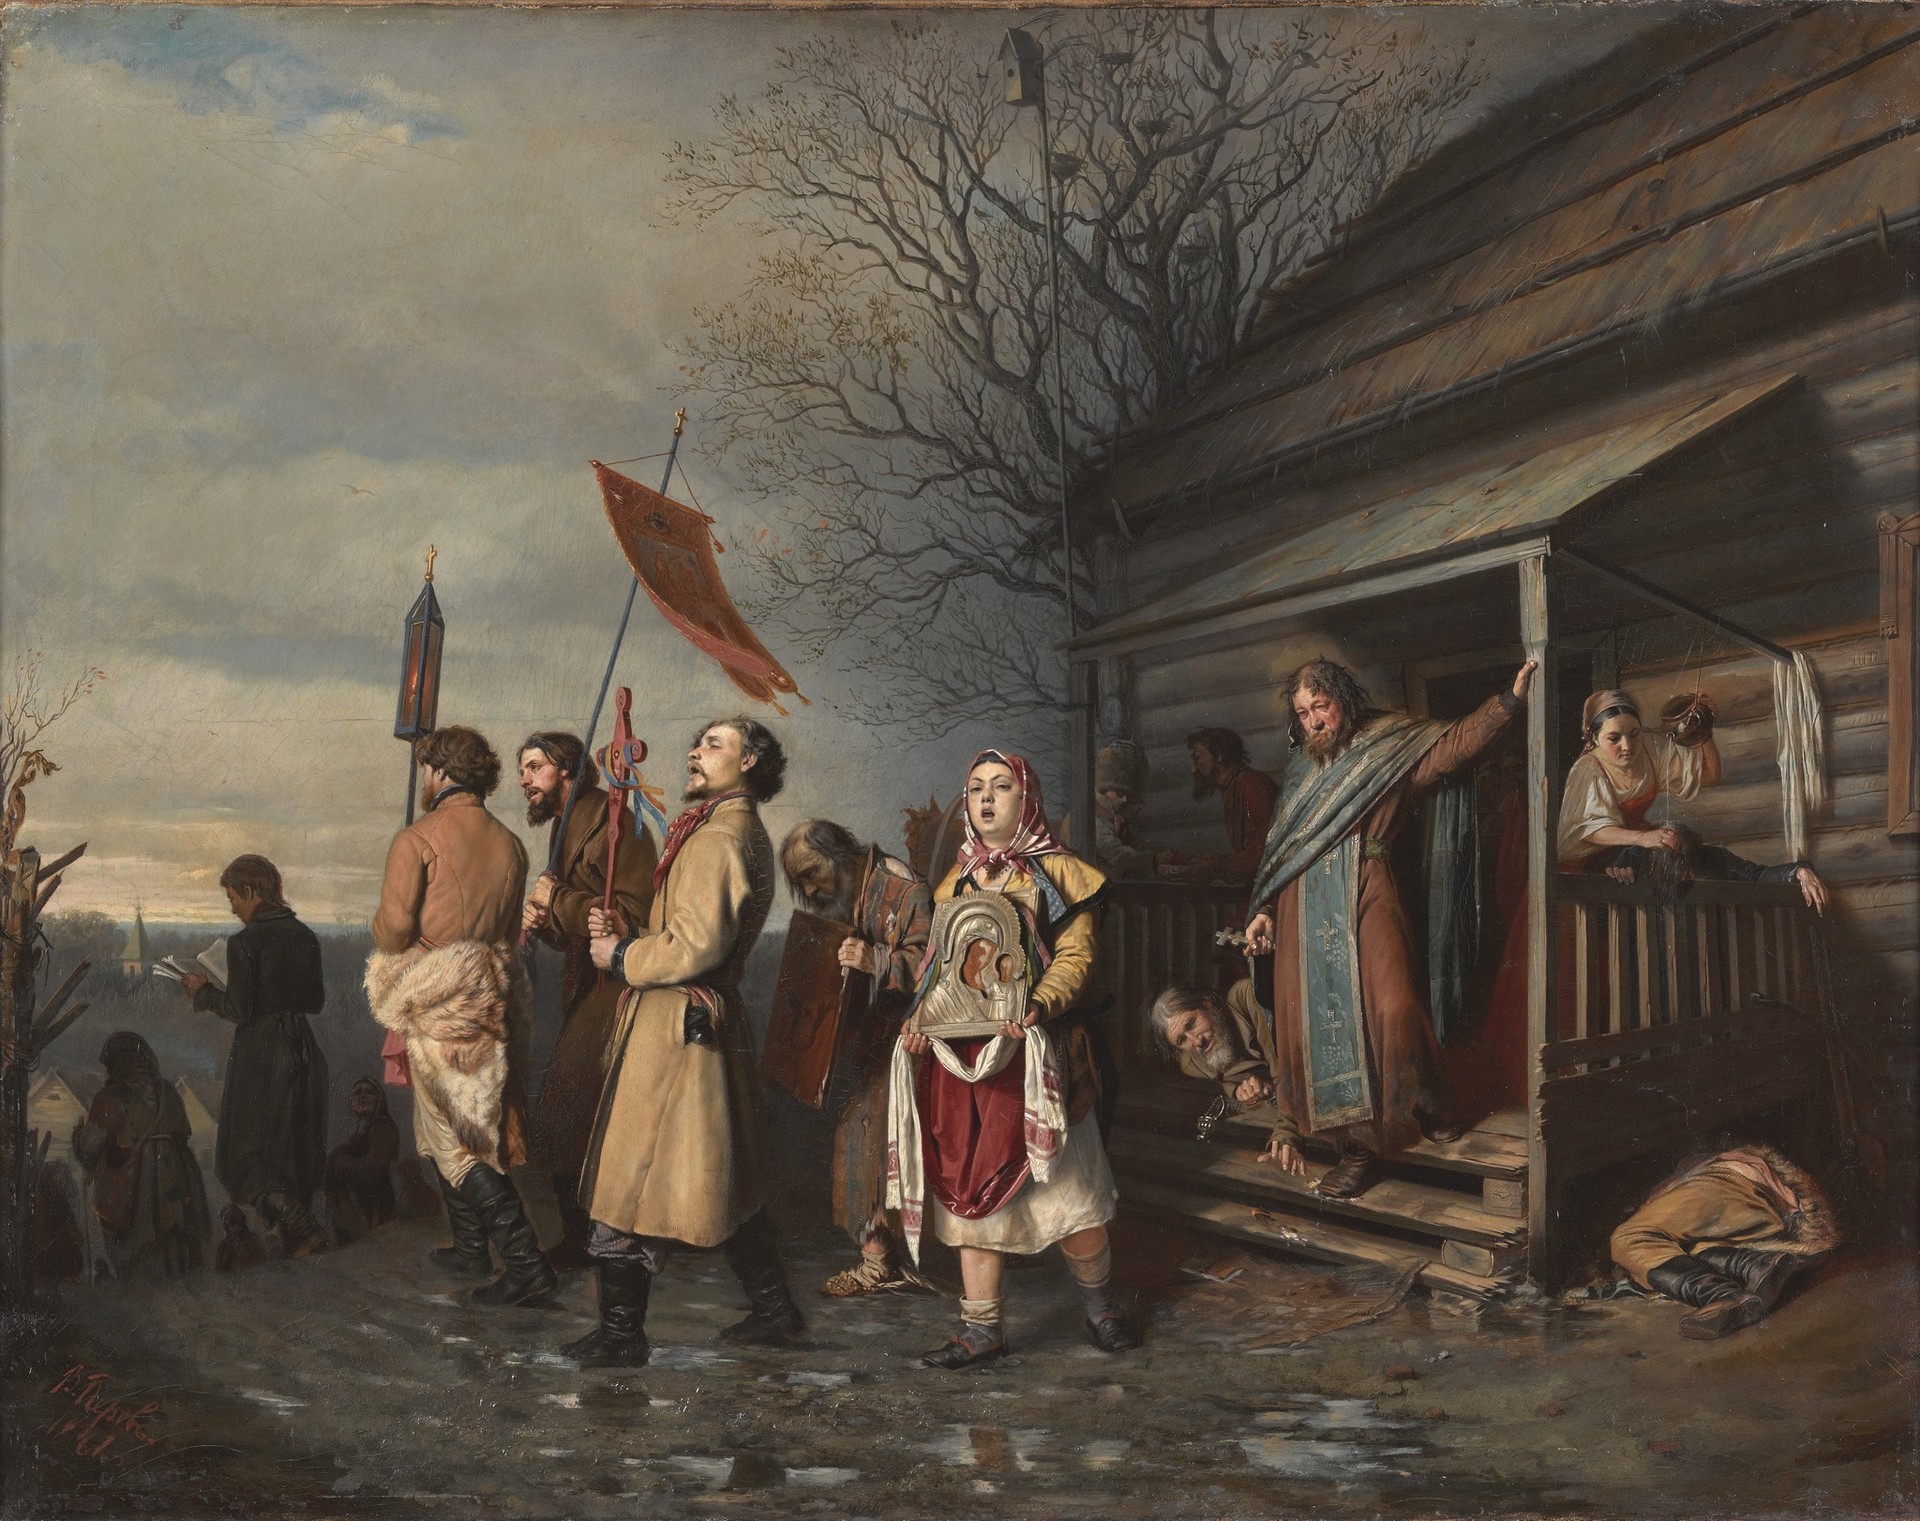 Vasily Perov. Easter Procession in a Village. 1861